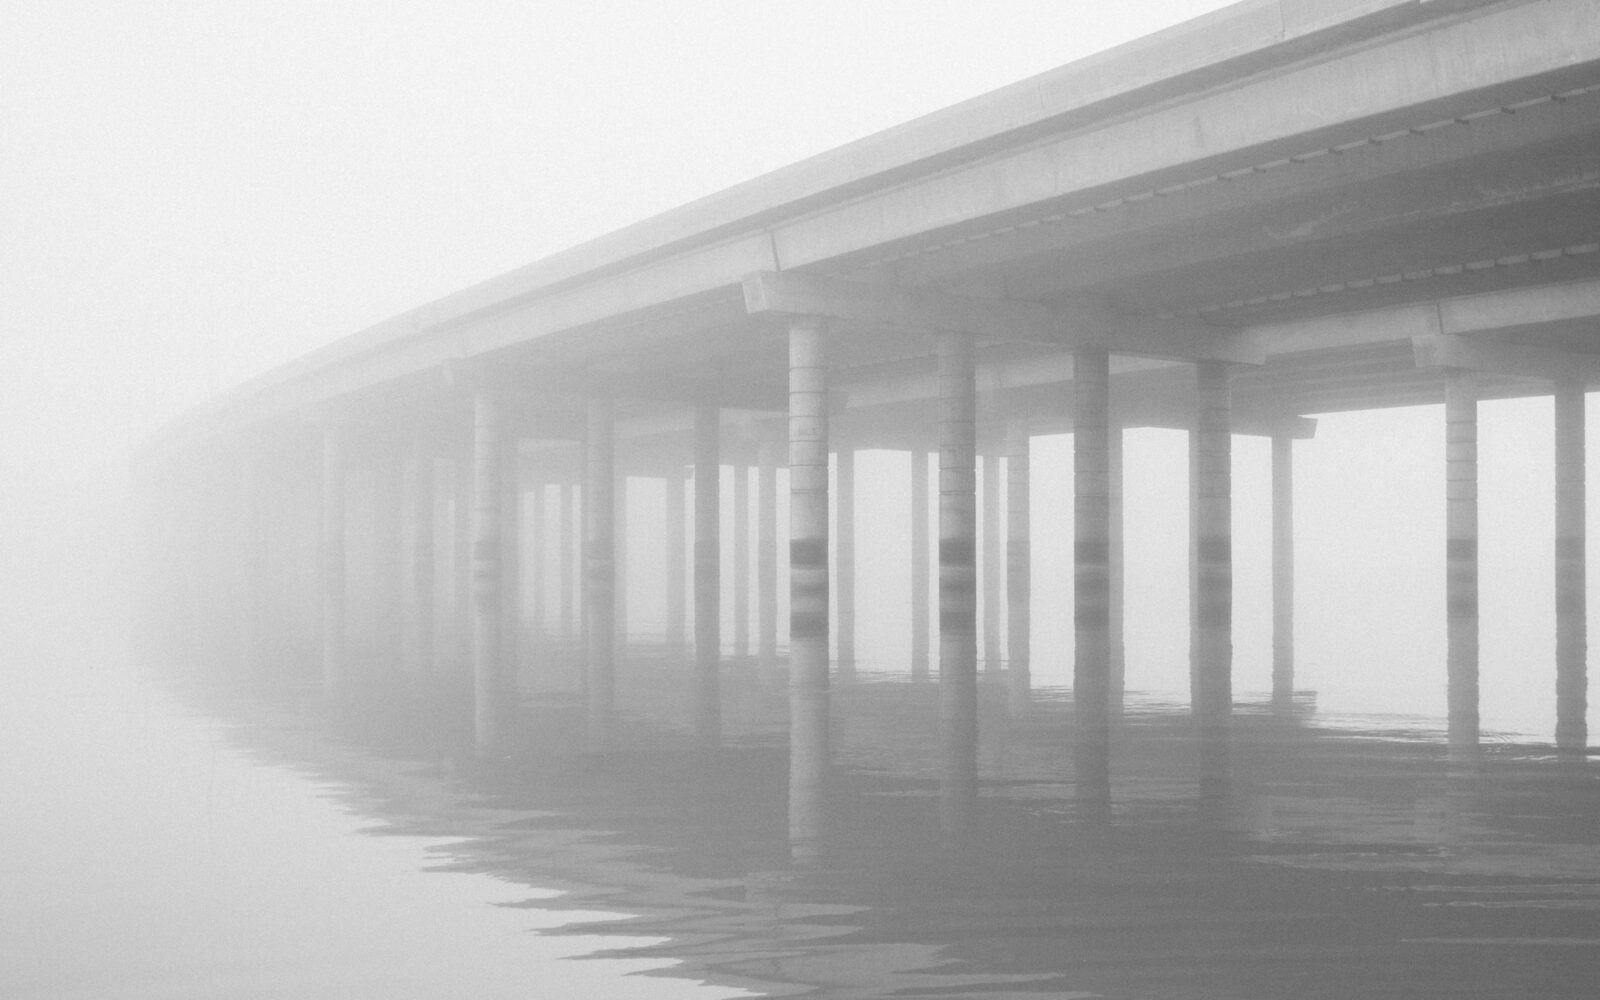 A Bridge In Fog Extending Into The Mysterious White Nothingness